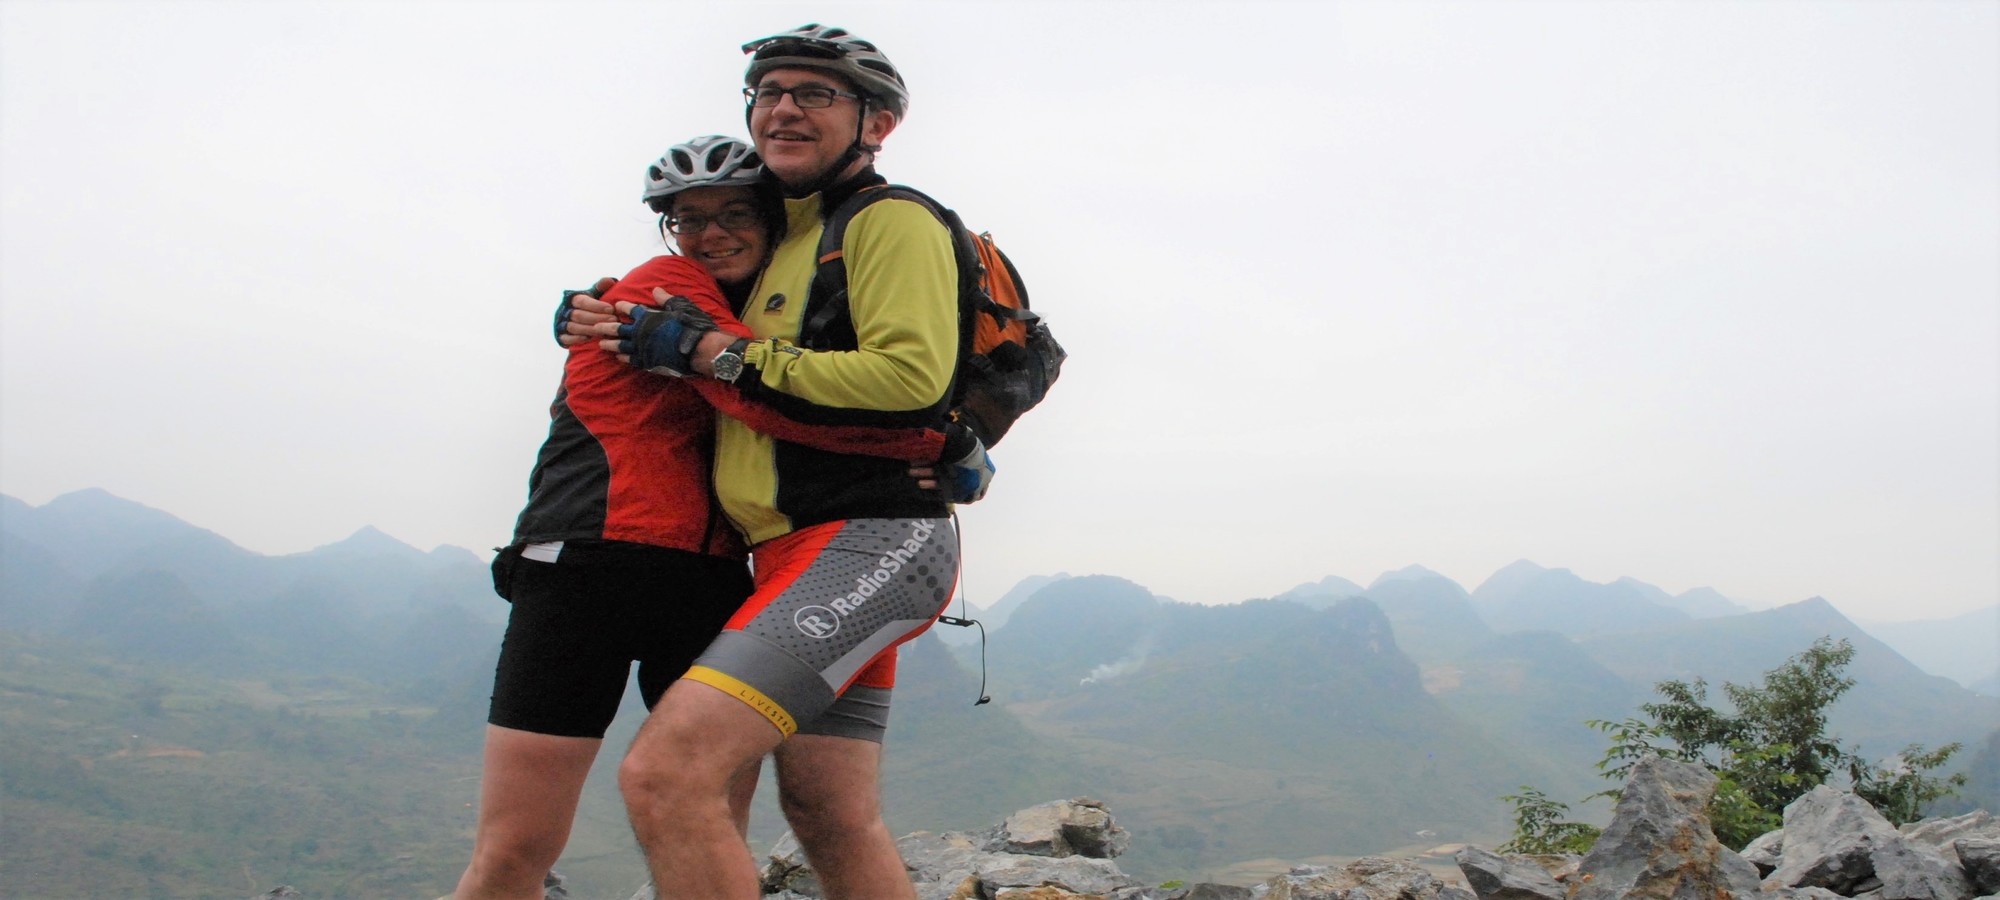 North East Vietnam Cycling Holiday